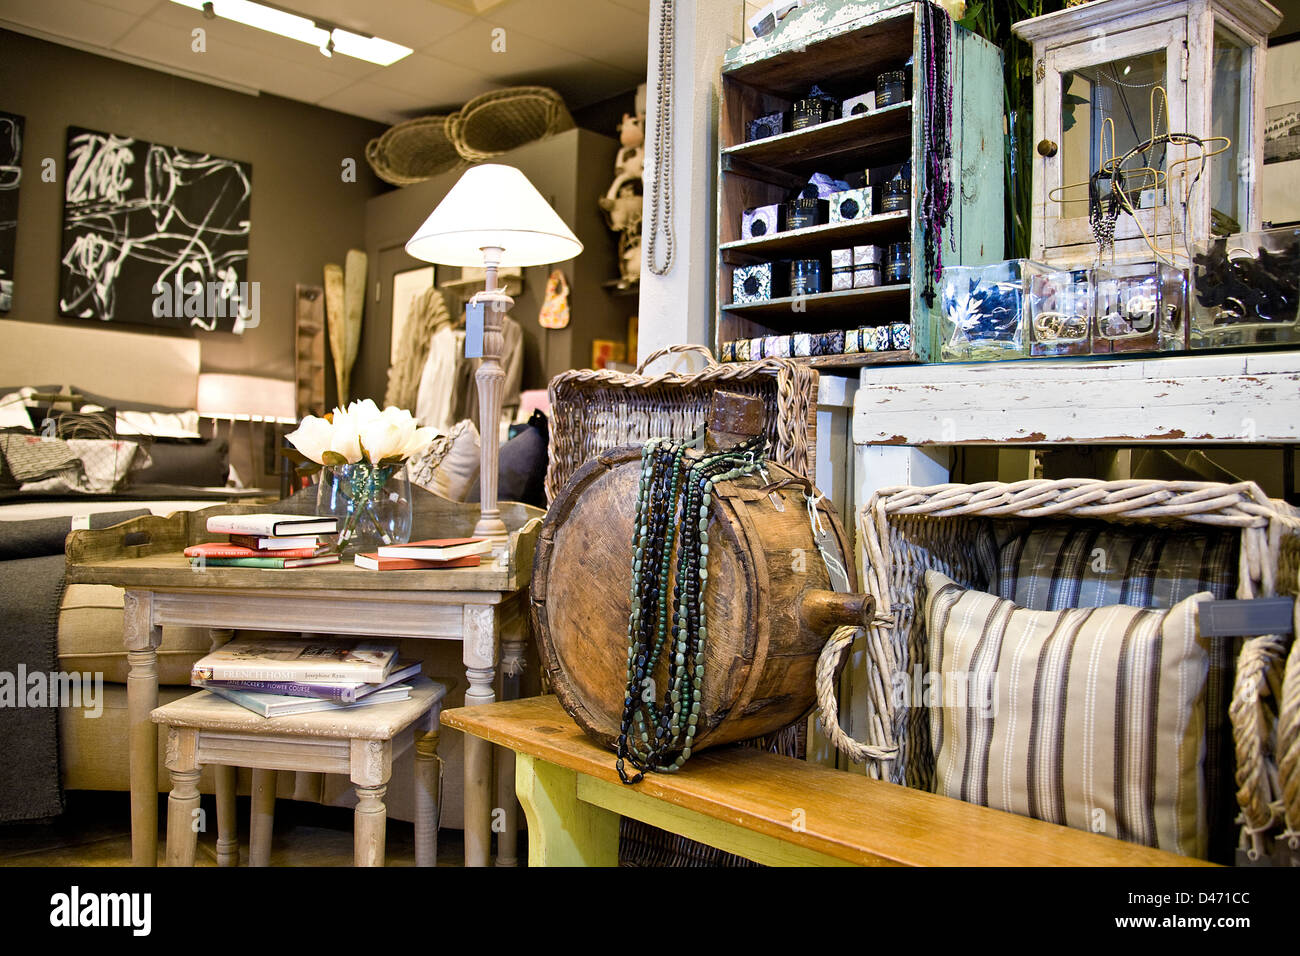 Image of a store's homewares display, water canteen, cushions and cane baskets in foreground, desks lamps, bedding in background Stock Photo